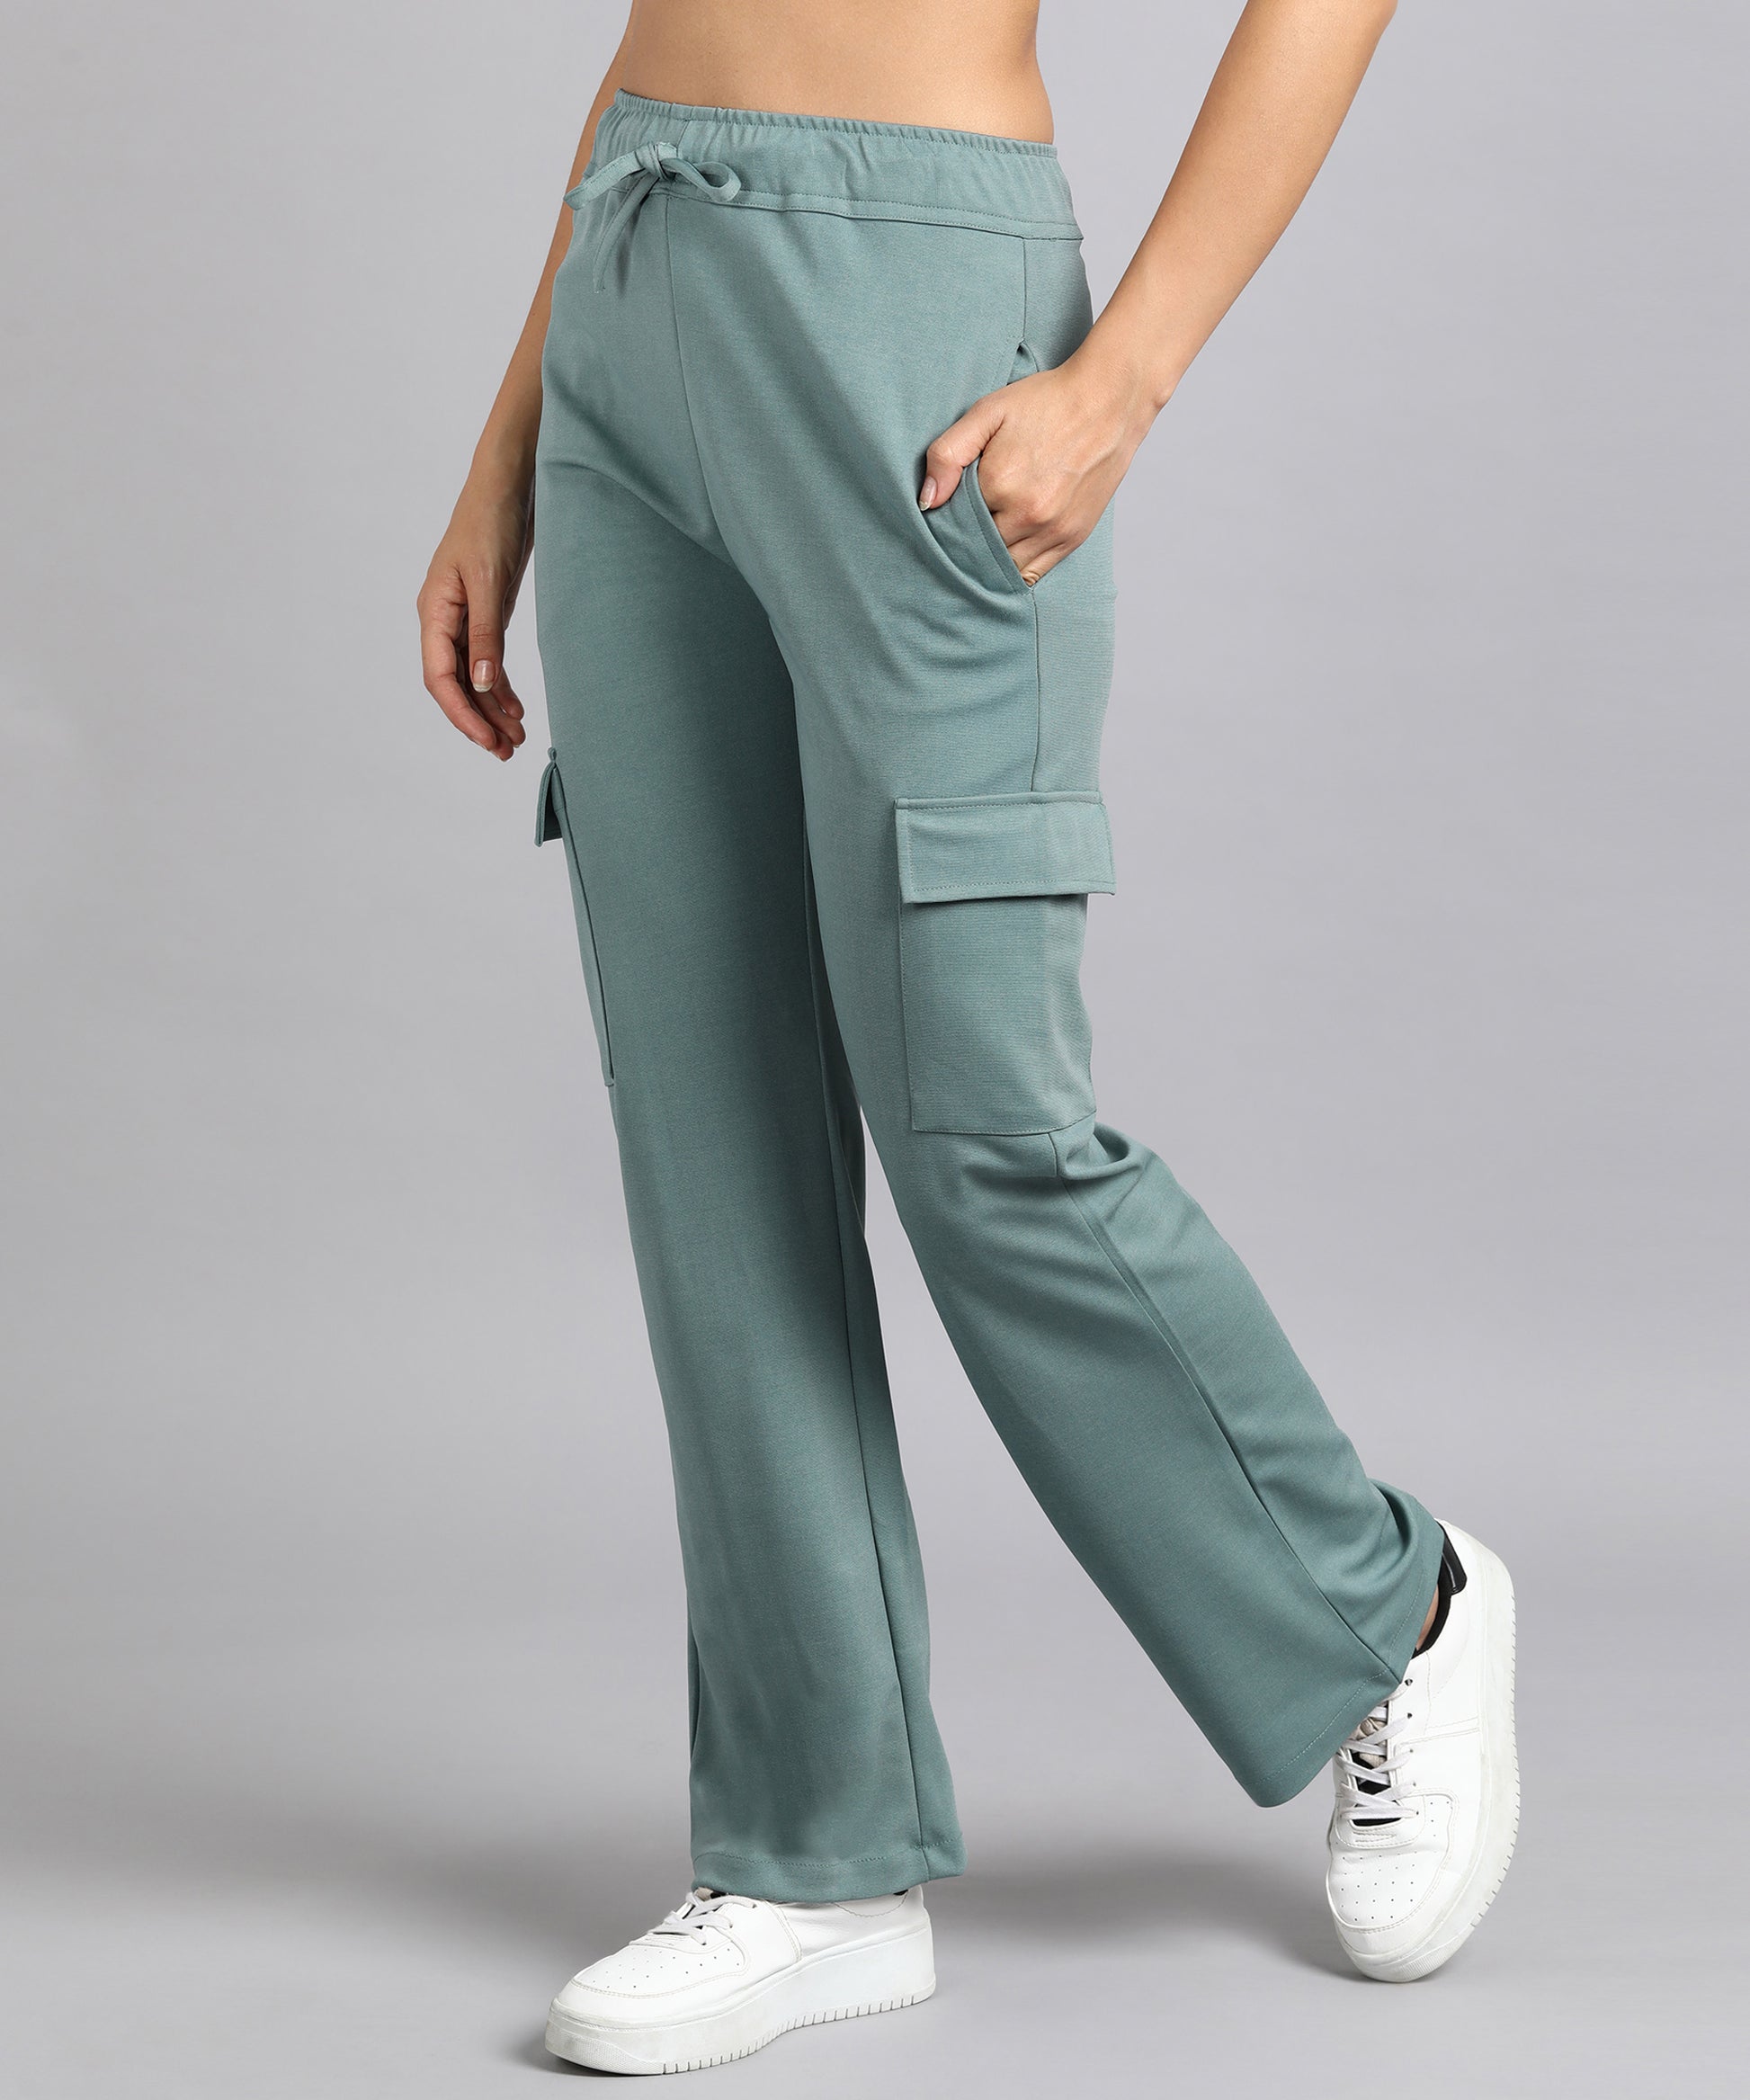 Trousers for women - Trendy bell-bottom pant for women and girls. at Rs  749.00, Girls Trouser